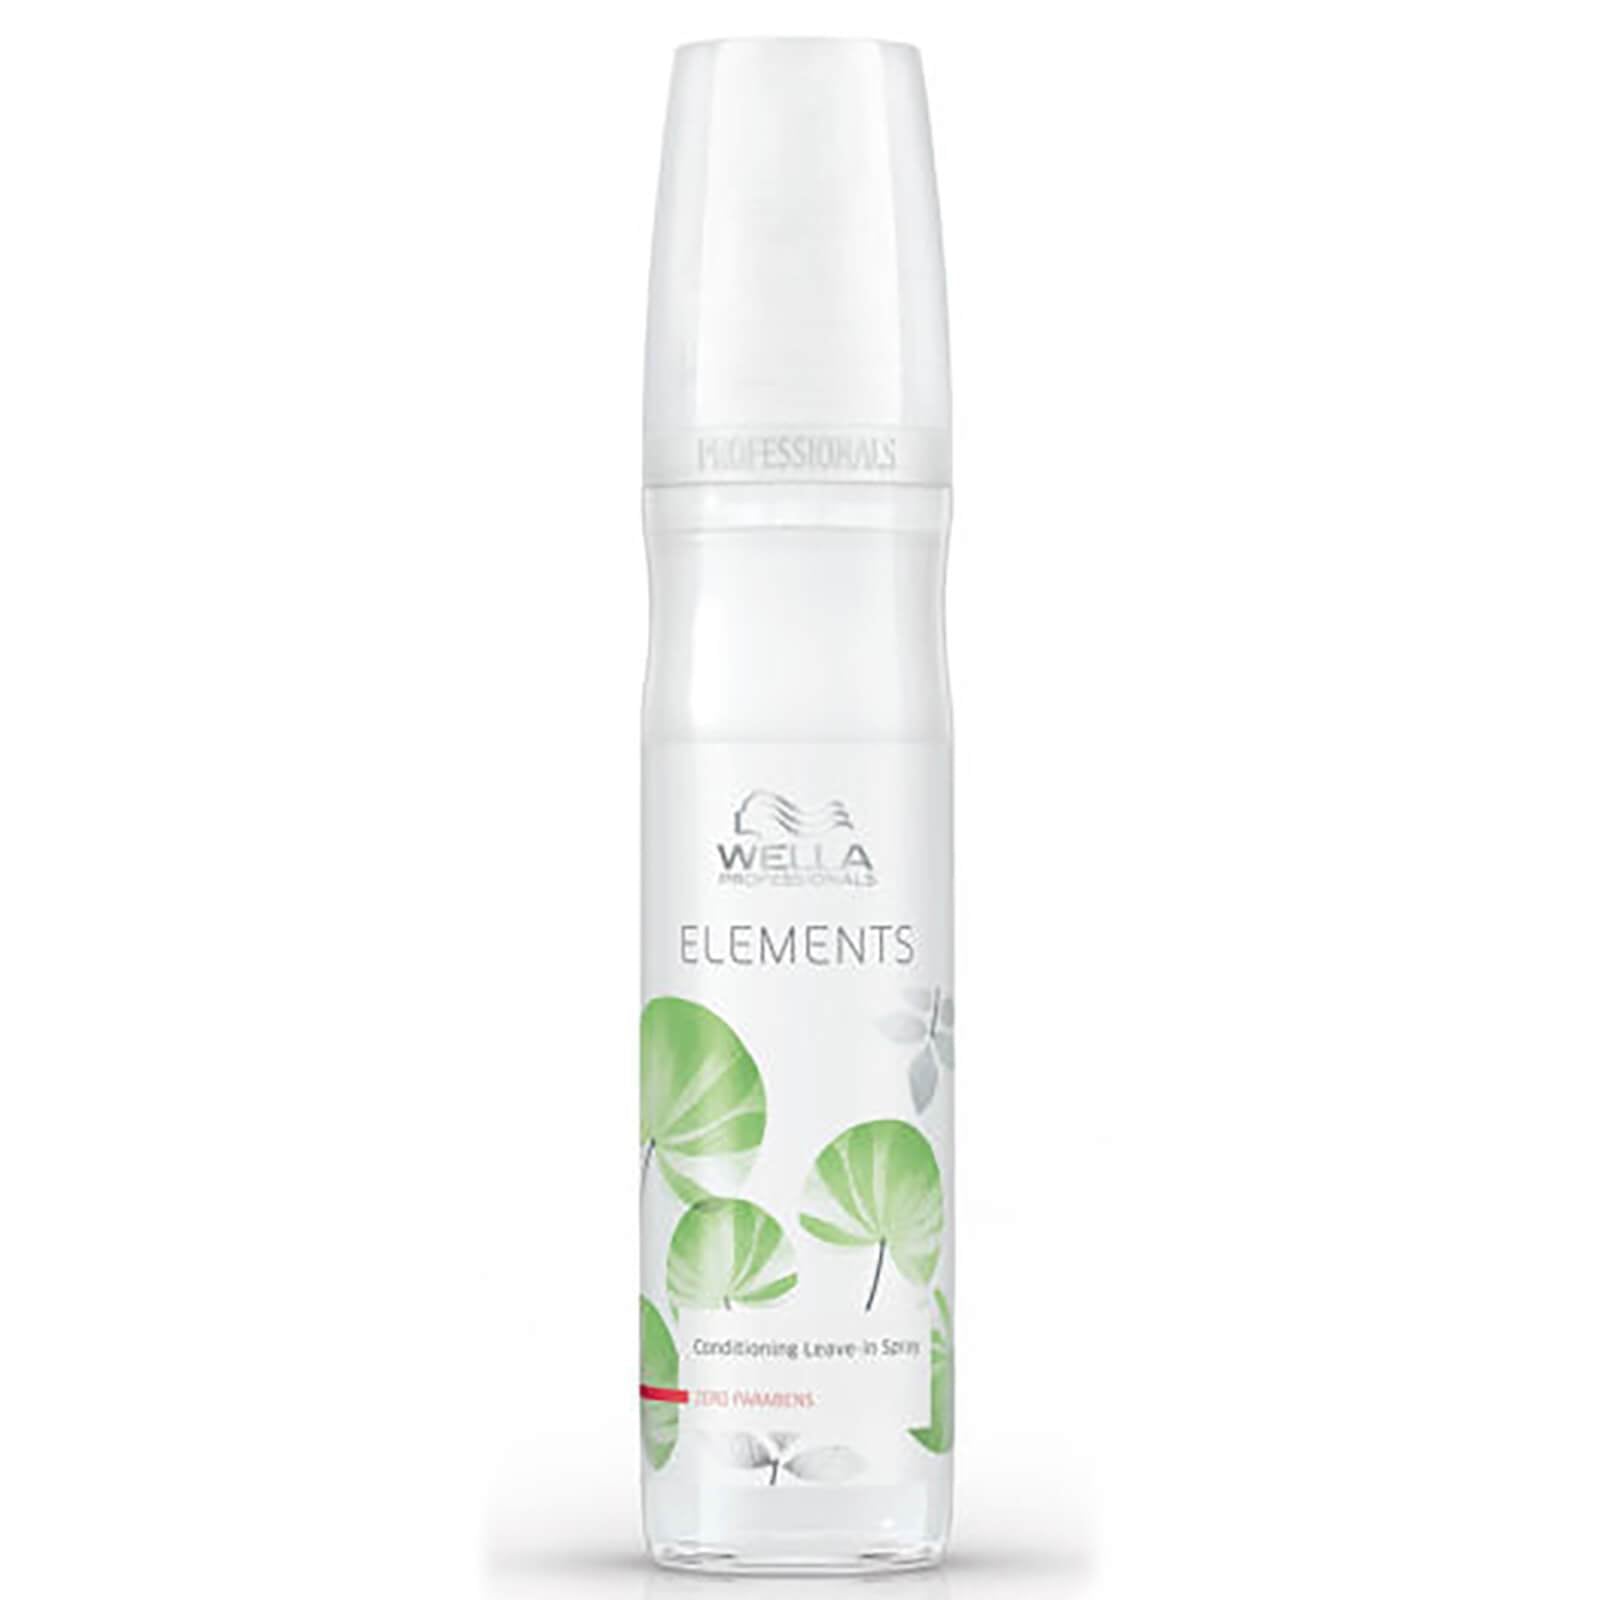 Wella Elements Leave-In Conditioning Spray 150ml (Last of Range)